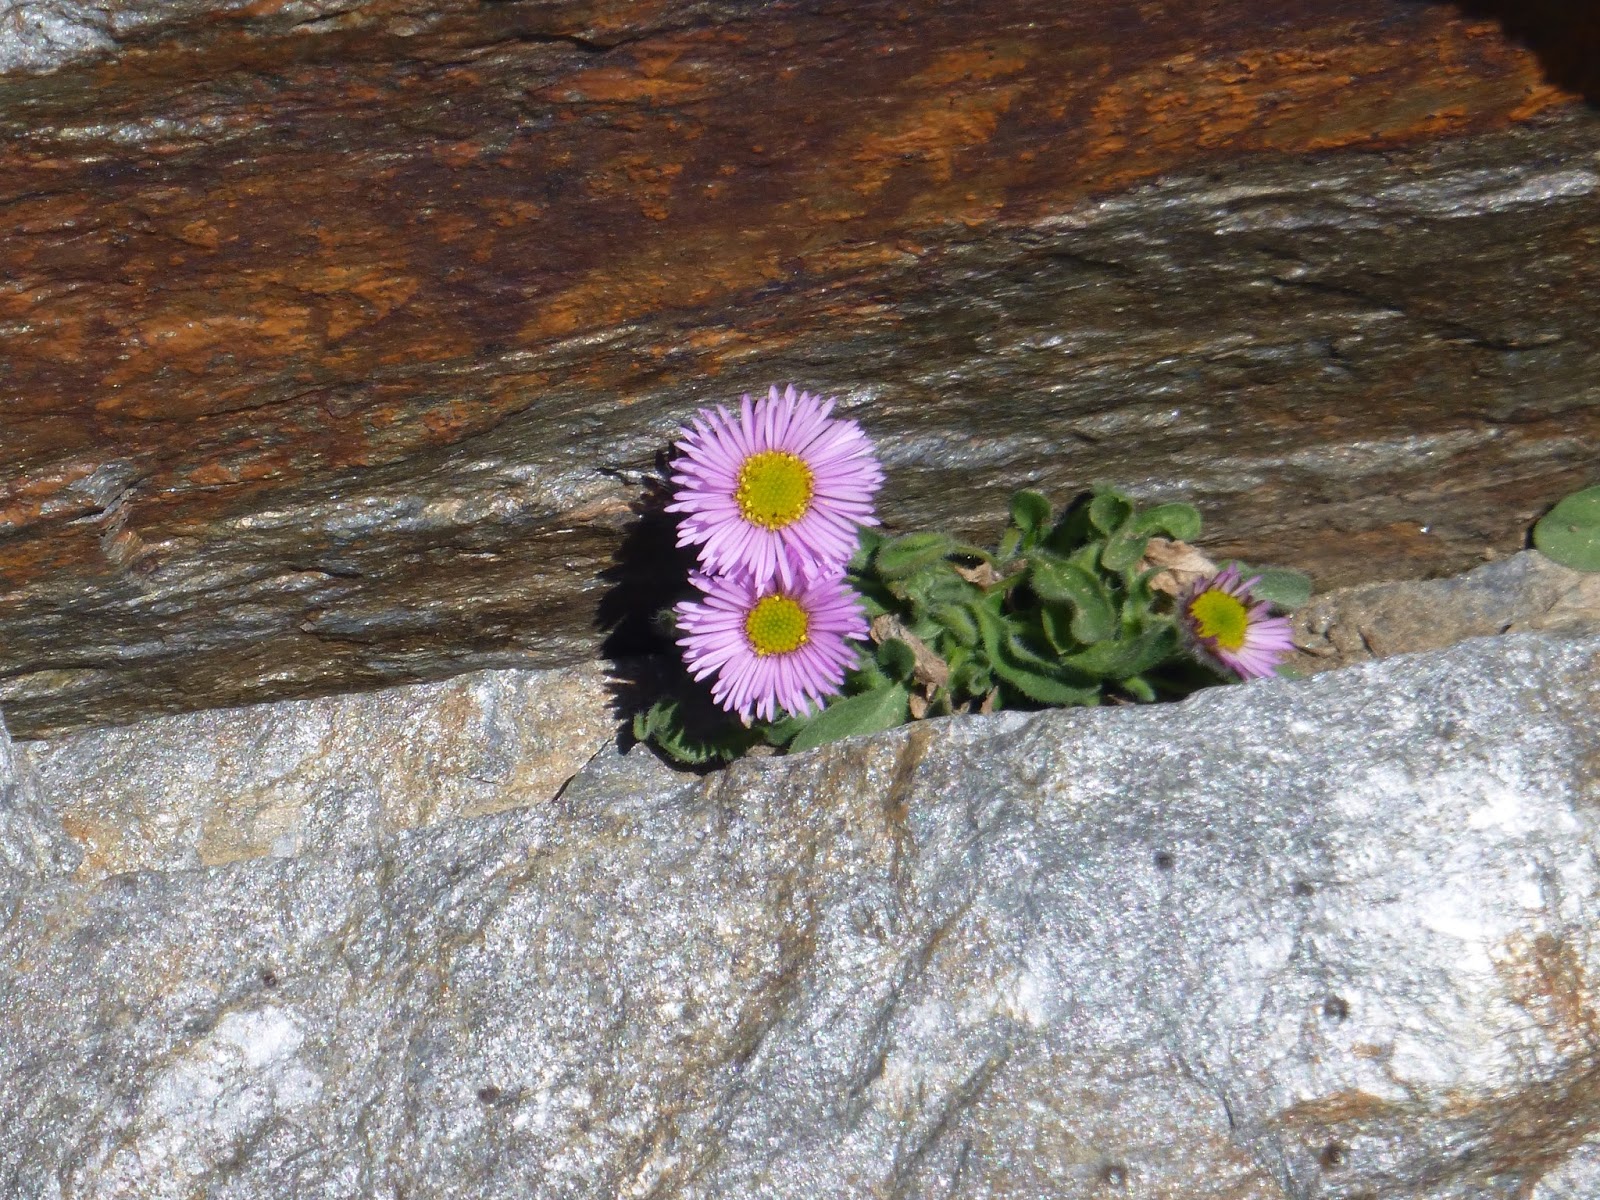 Cold Fleabane, a very rare endemic species